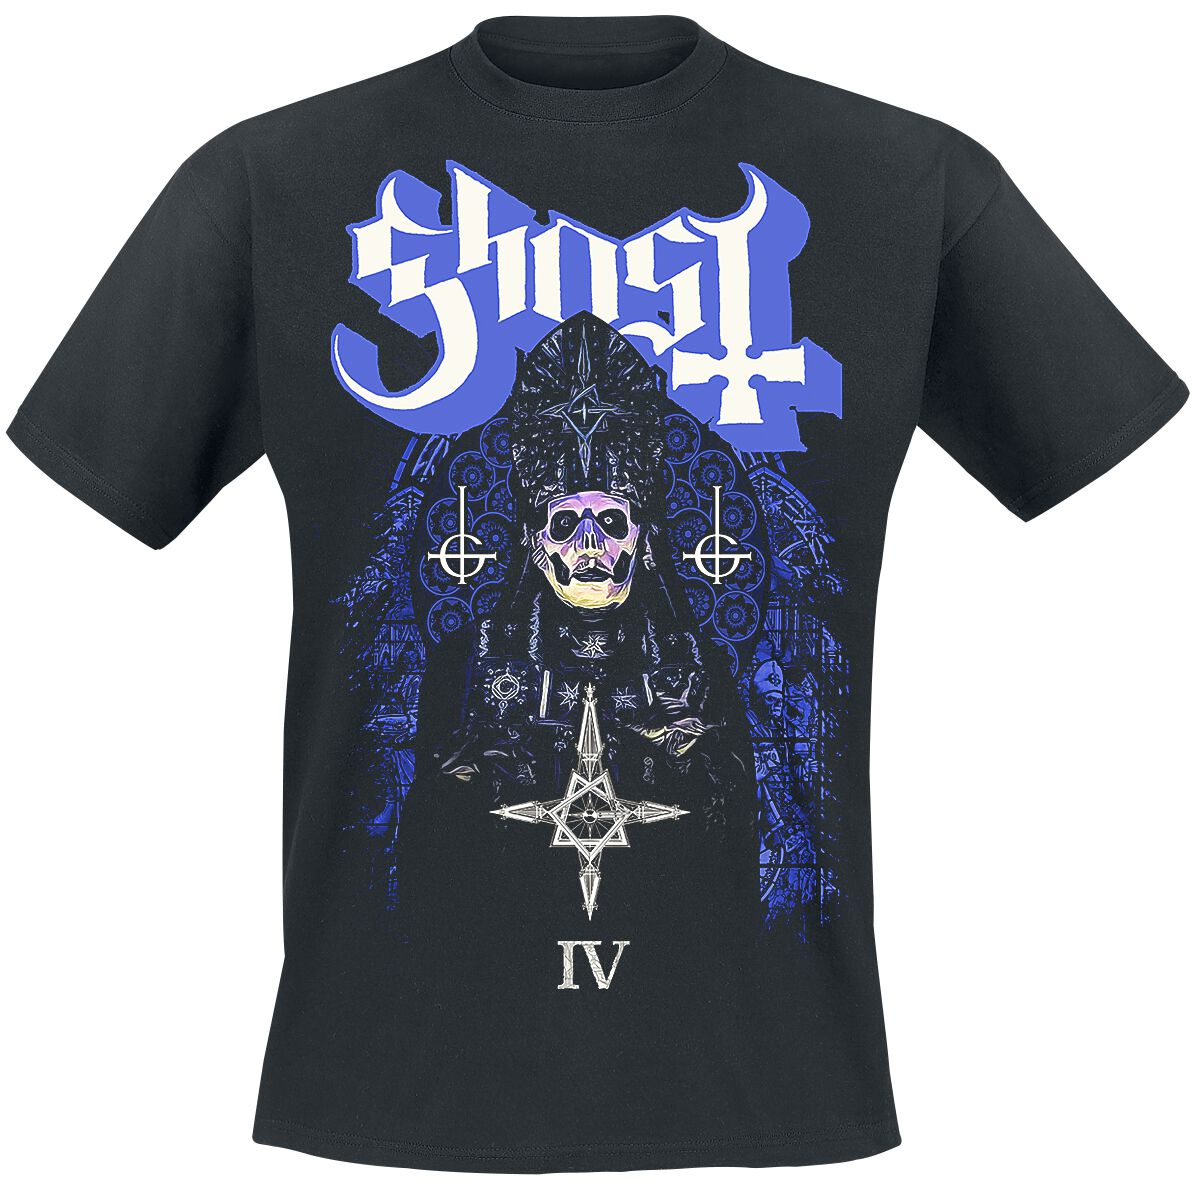 Ghost Stained Glass IV T-Shirt schwarz in L